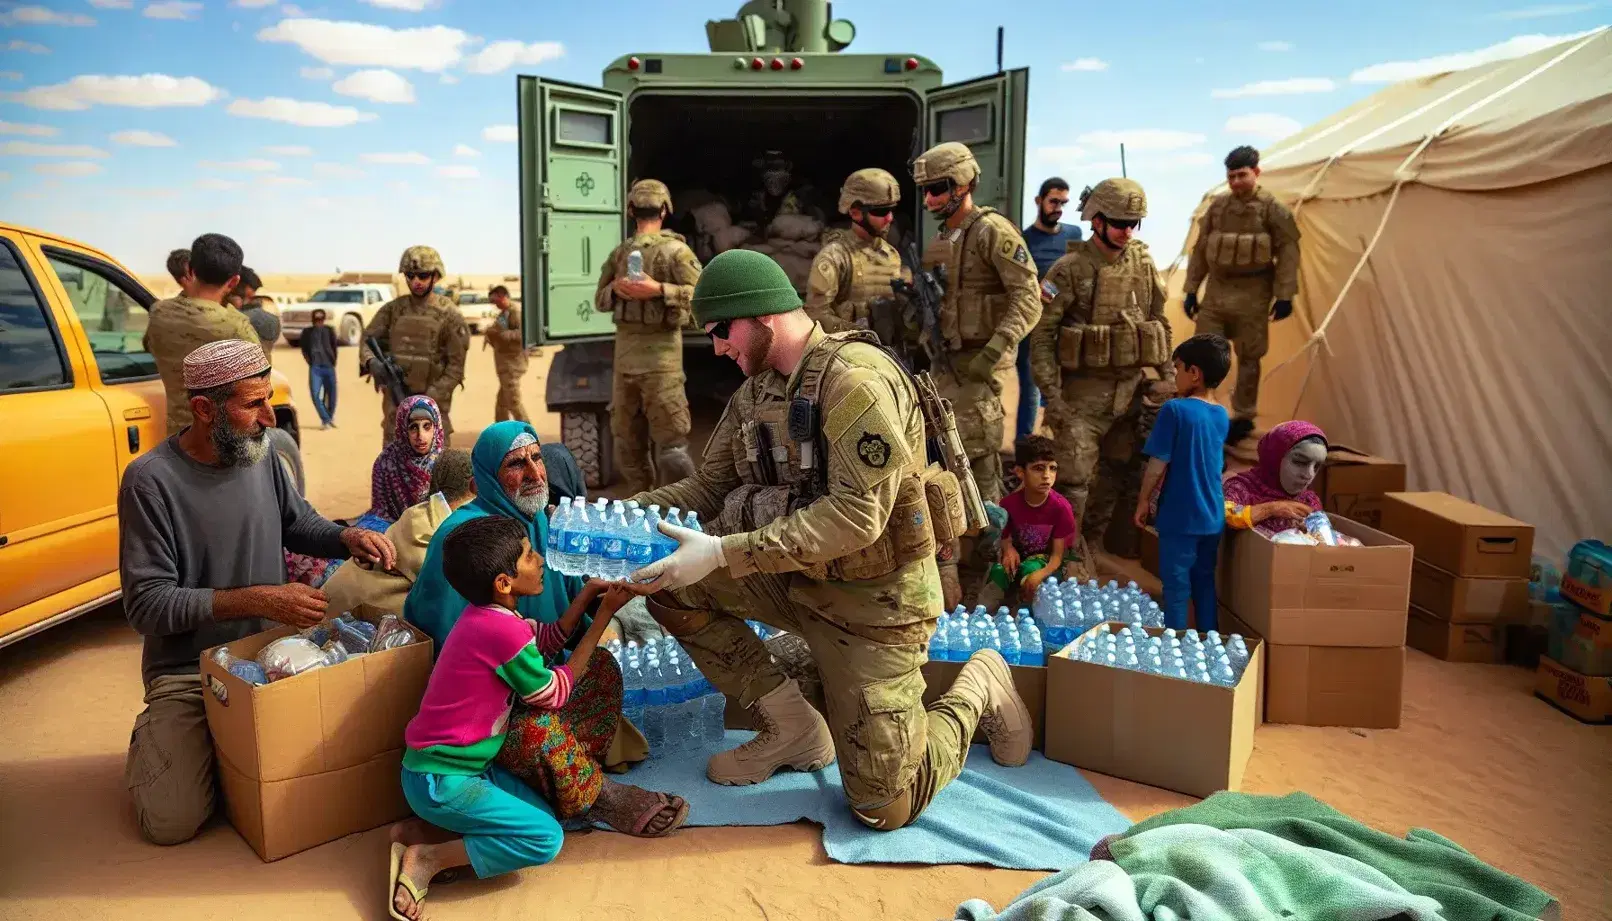 Humanitarian aid scene with military personnel distributing water and supplies to civilians near a medical tent and military vehicle under a clear sky.